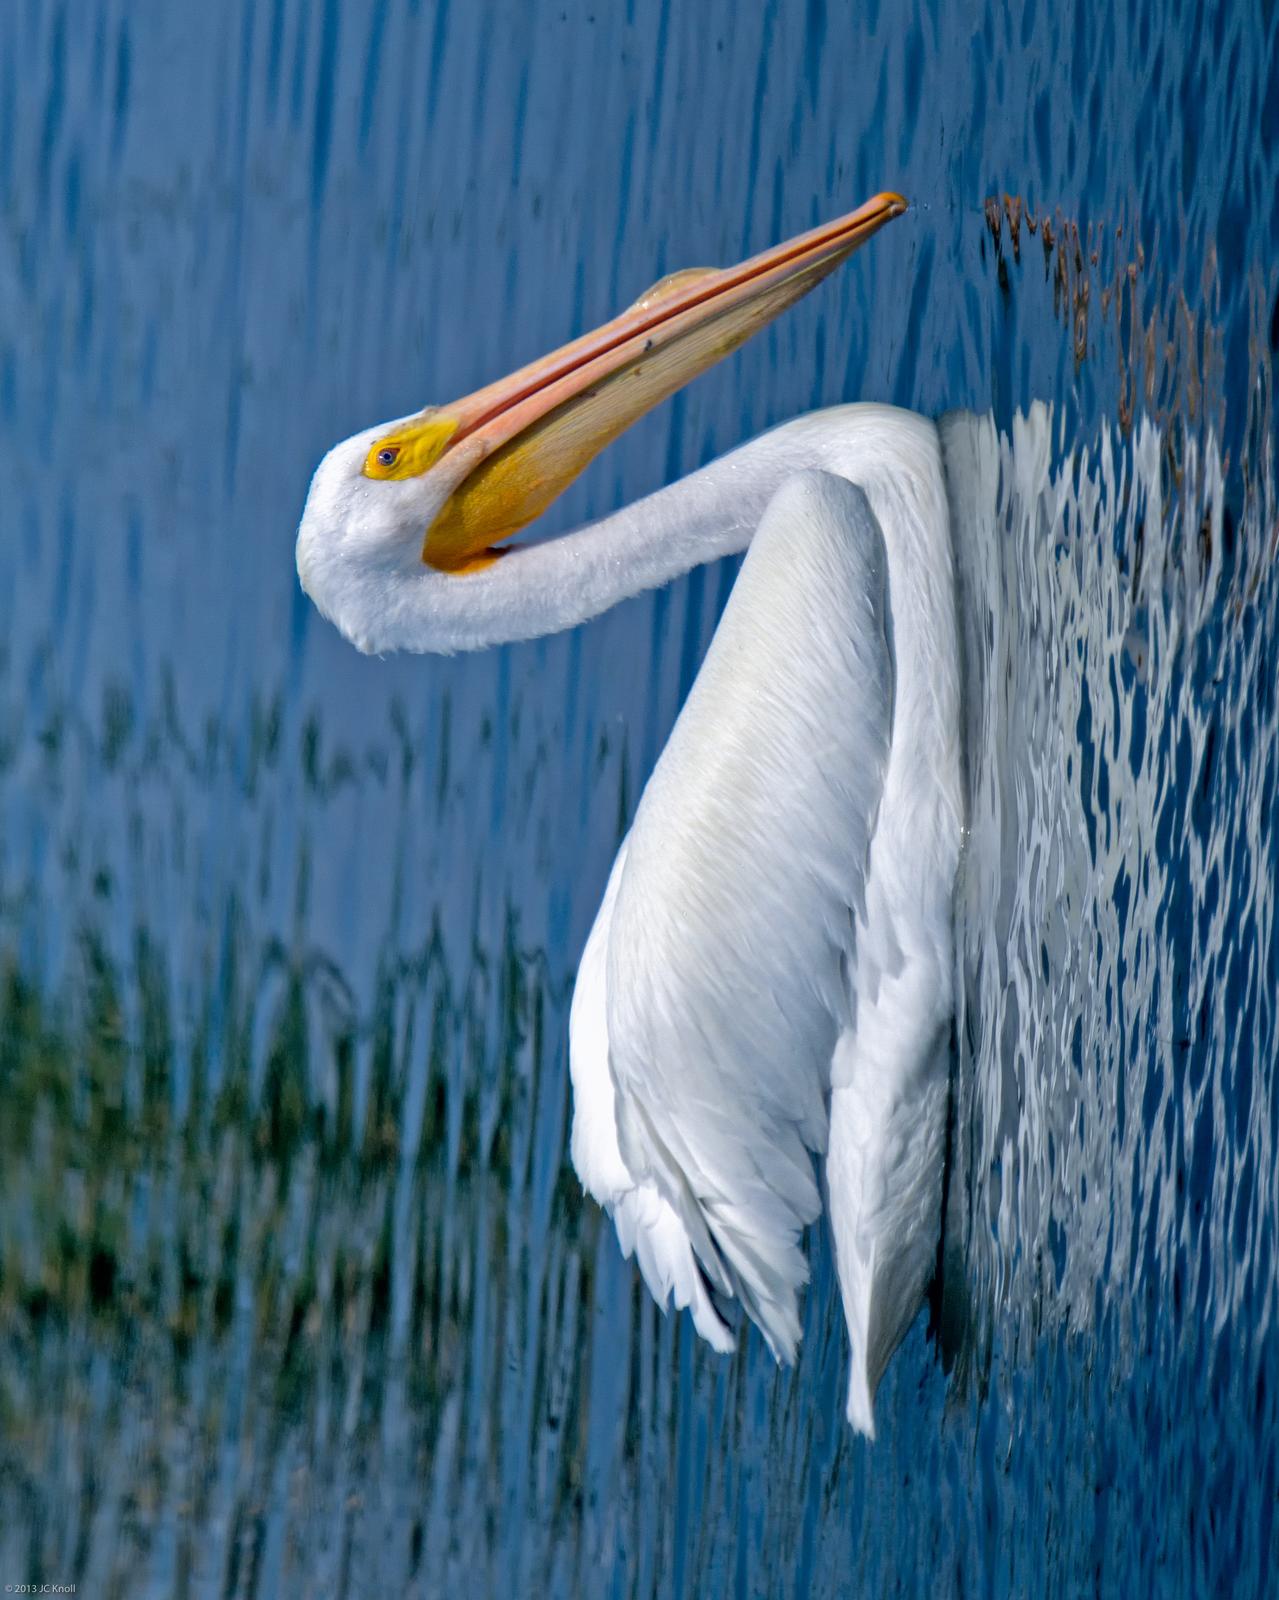 American White Pelican Photo by JC Knoll